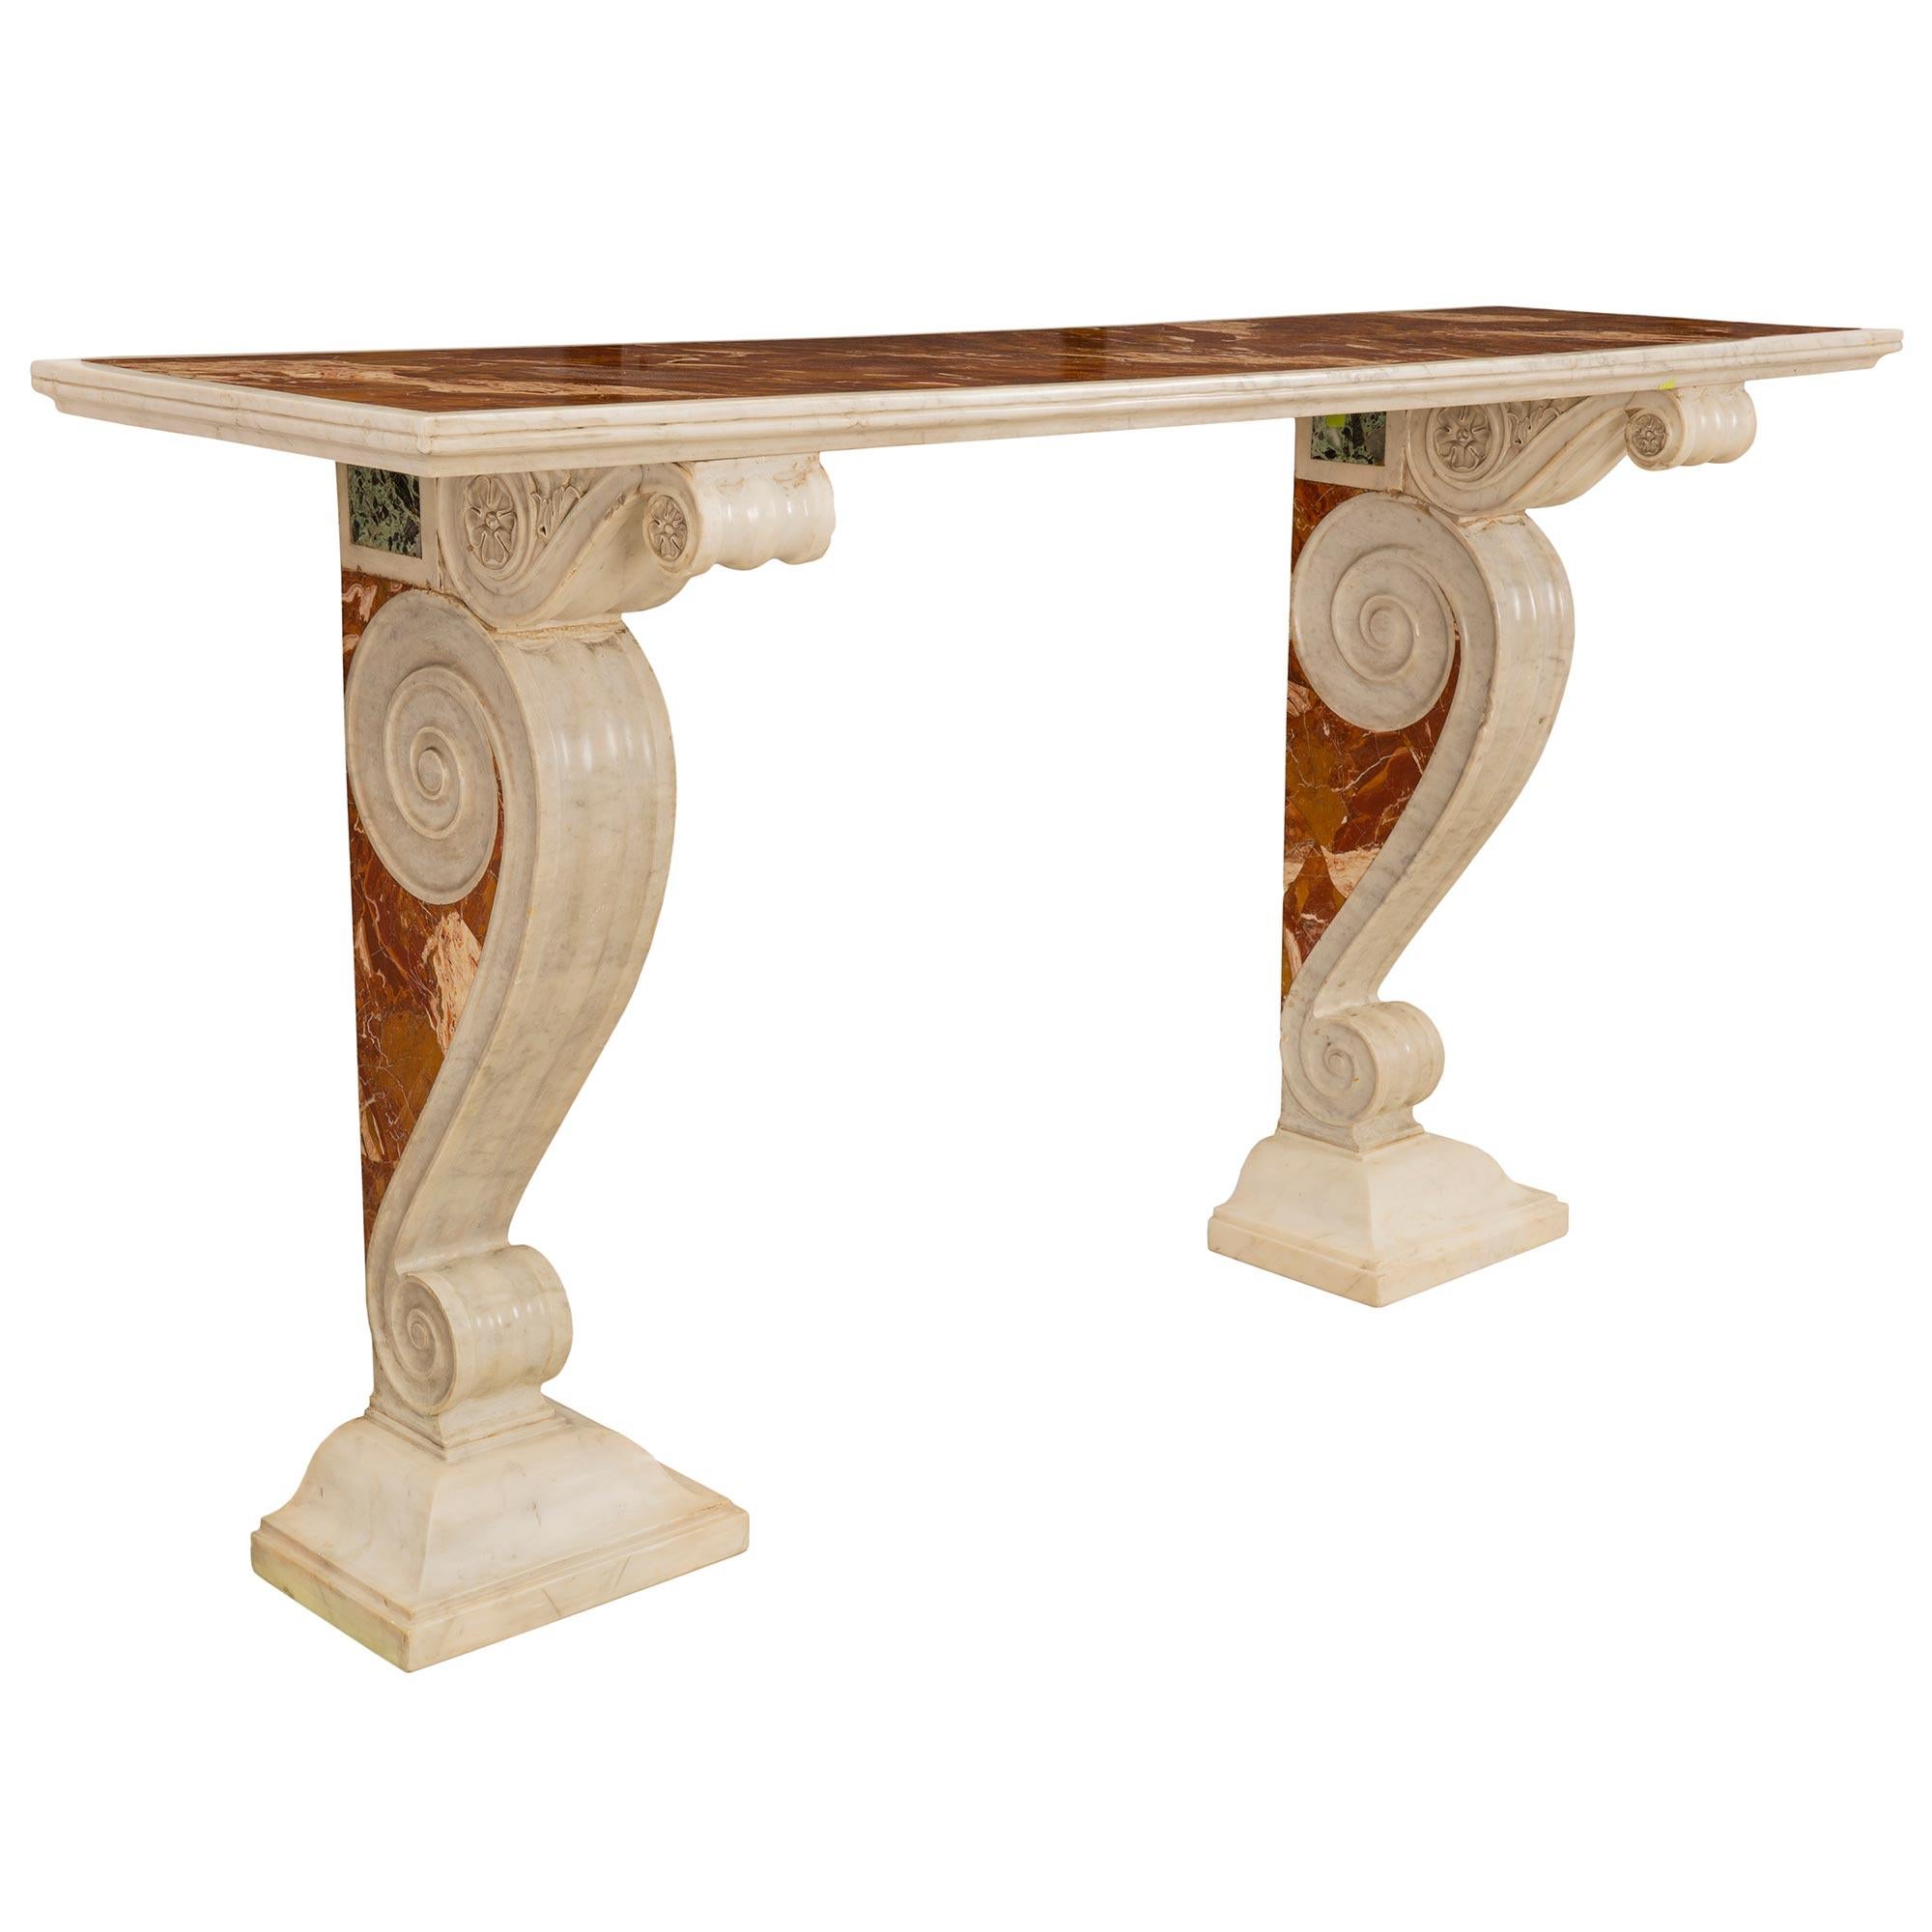 Italian 19th Century Neoclassical Style Marble Freestanding Console In Good Condition For Sale In West Palm Beach, FL